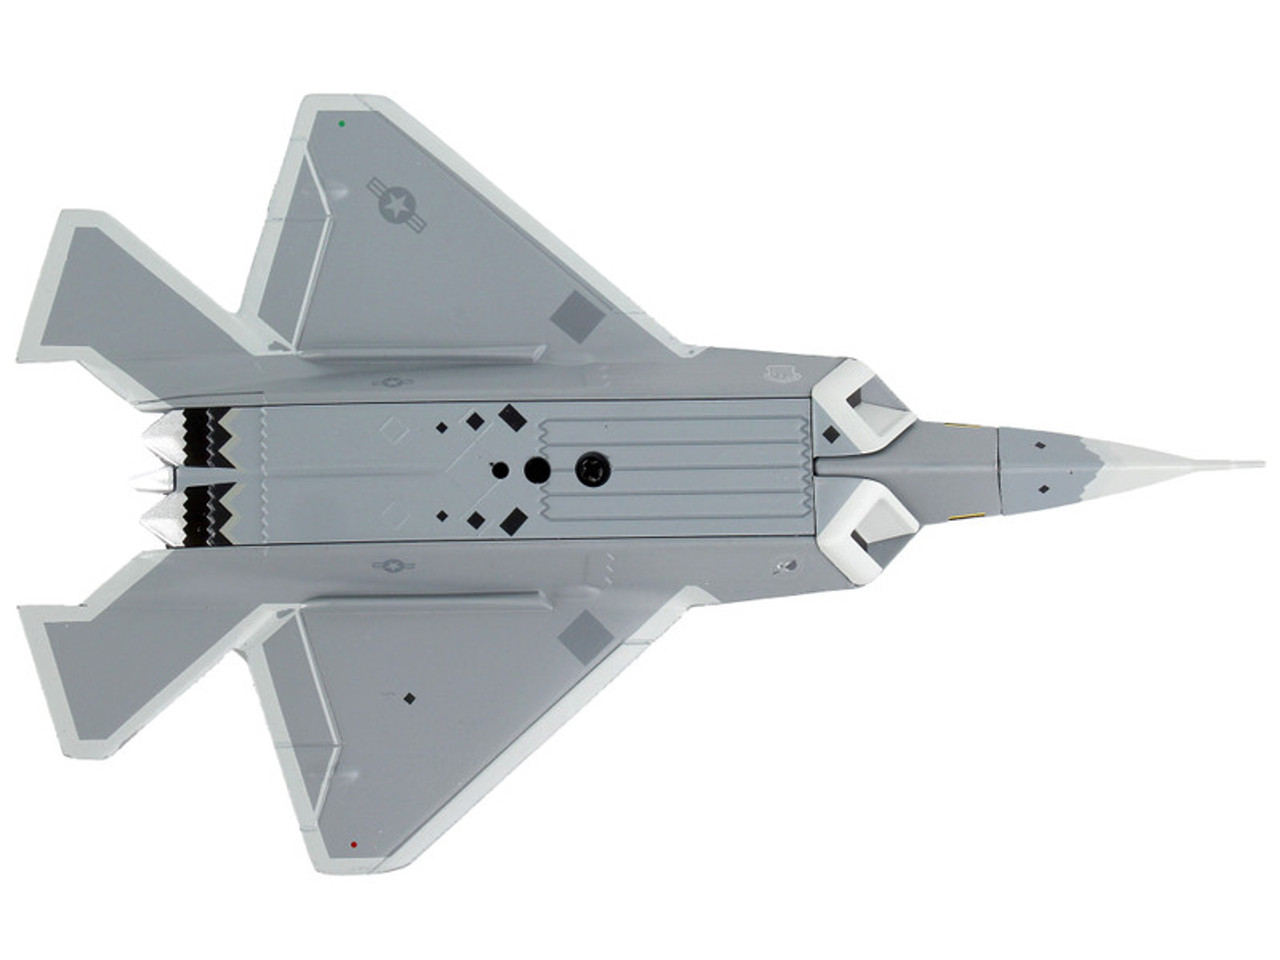 Lockheed Martin F-22 Raptor Fighter Aircraft "United States Air Force" 1/145 Diecast Model Airplane by Postage Stamp